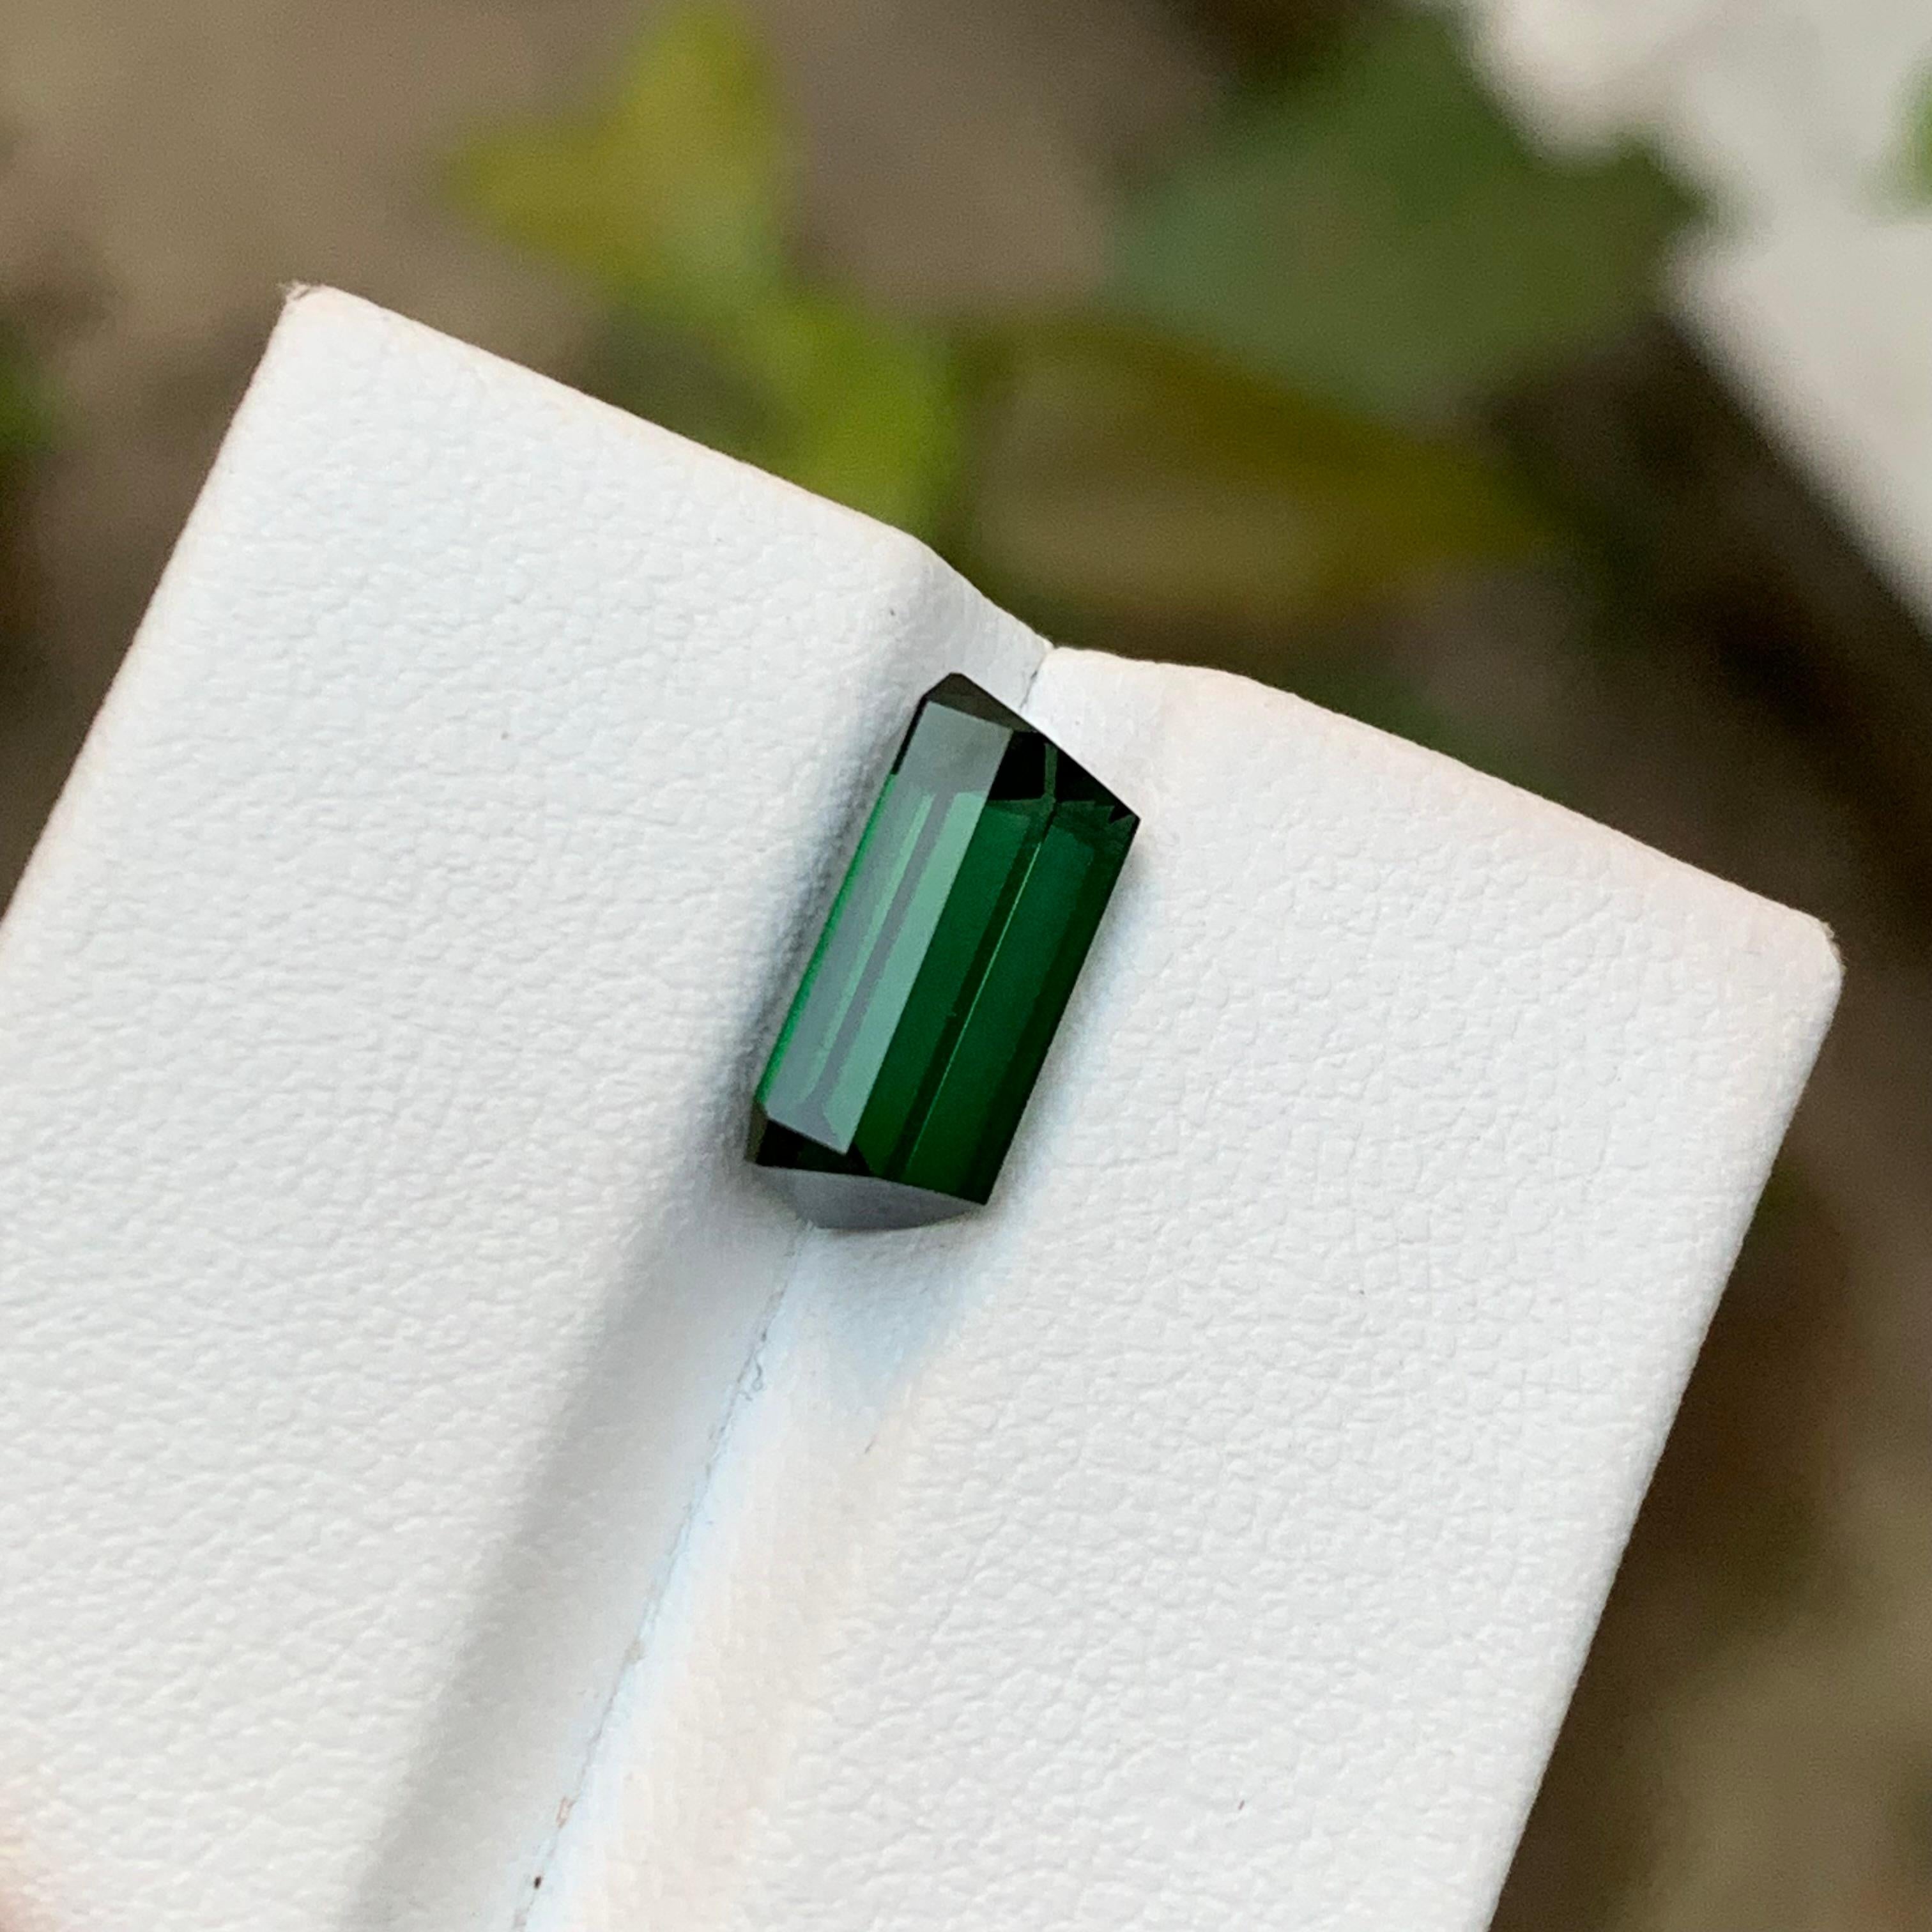 Rare Deep Green Natural Tourmaline Loose Gemstone, 3.75 Ct Emerald Cut for Ring For Sale 5